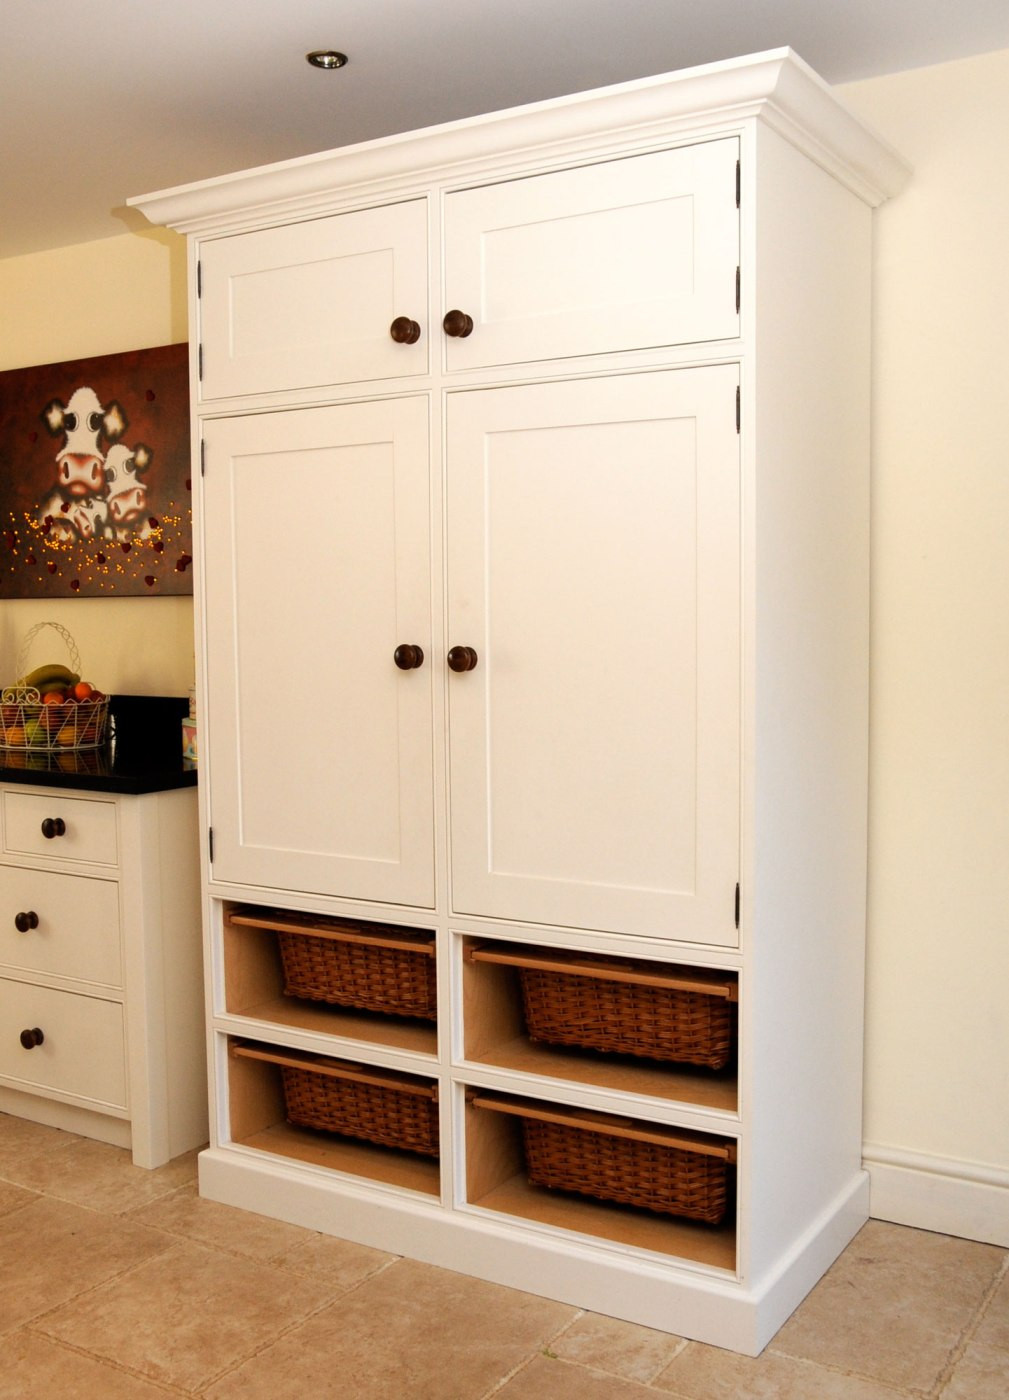 White Kitchen Pantry Freestanding
 Pantry Inspirational Free Standing Pantry To Add To Your